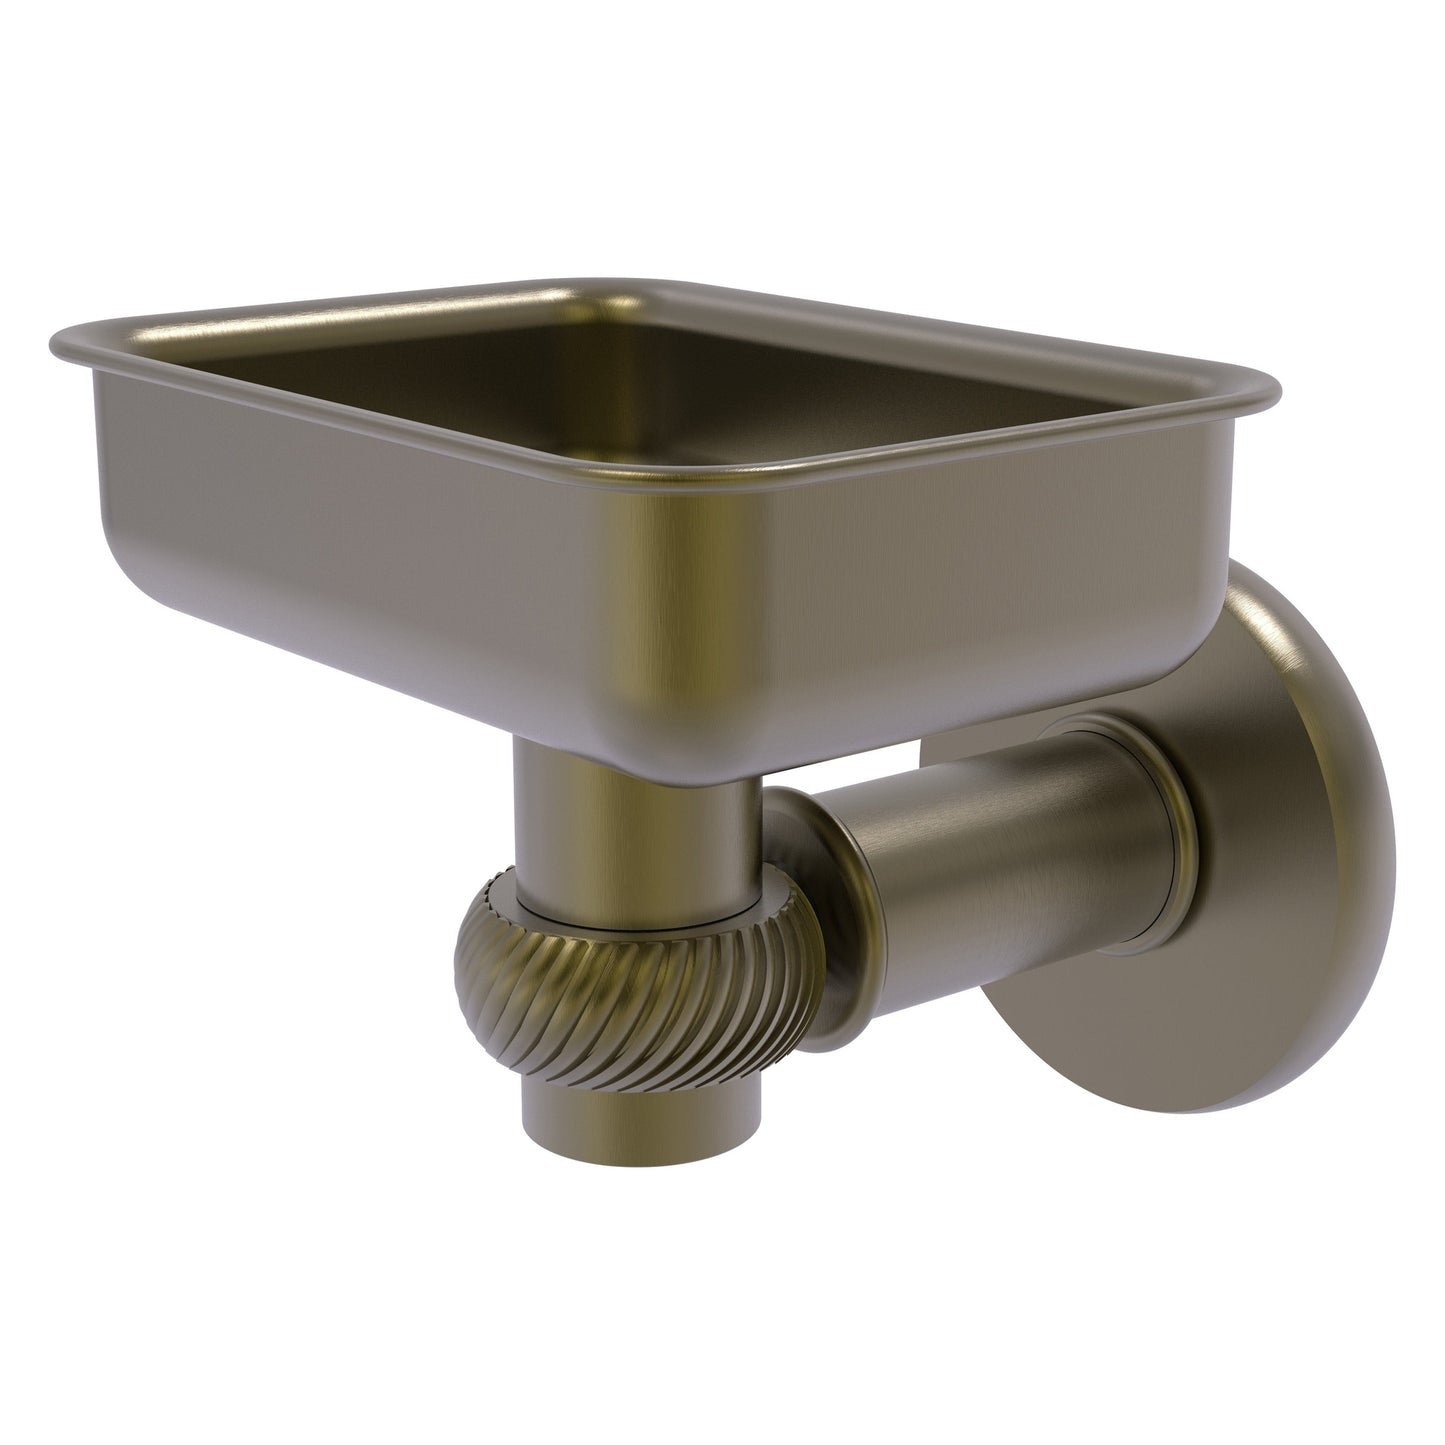 Allied Brass Continental 4.5" x 3.5" Antique Brass Solid Brass Wall-Mounted Soap Dish Holder with Twist Accents